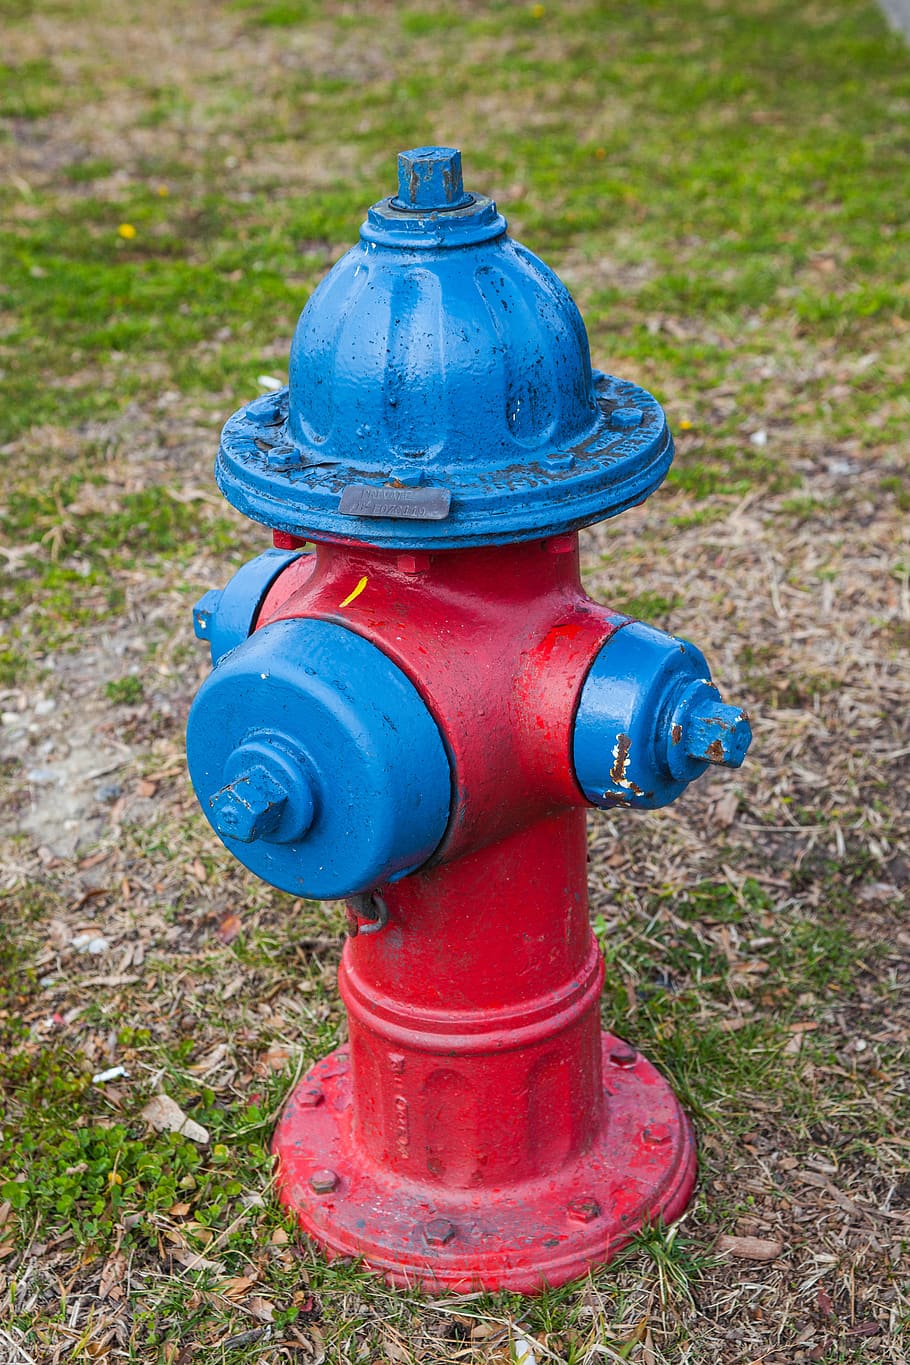 fire hydrant, blue, green, red, water, protection, metal, rescue, prevention, grass